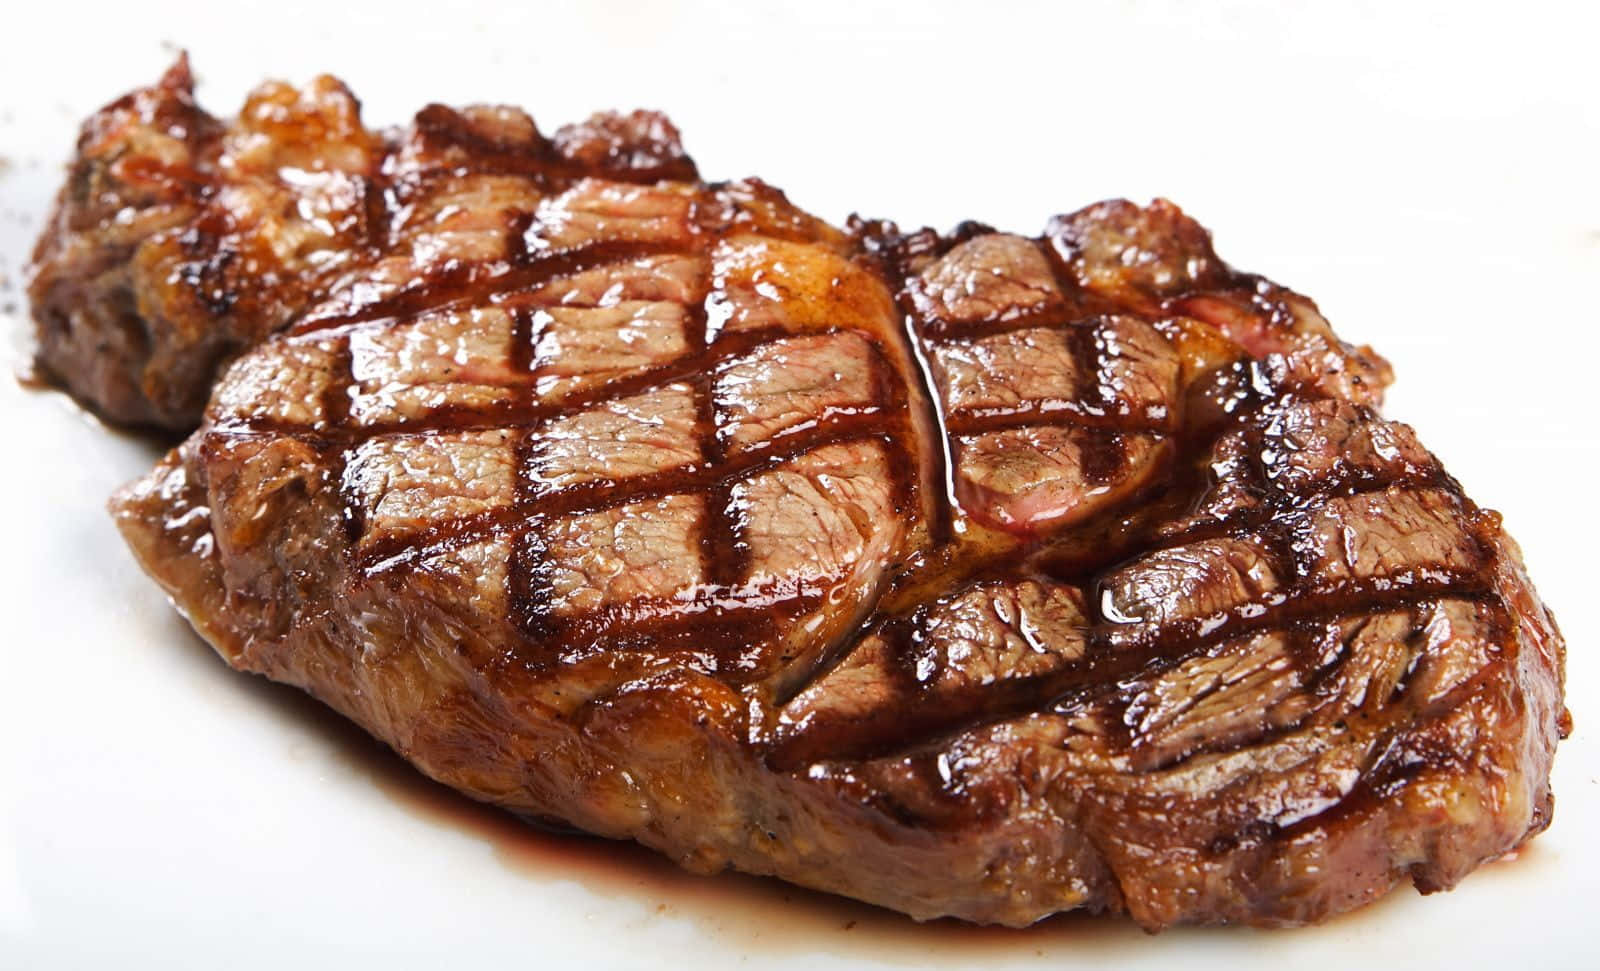 A Steak Is Sitting On A White Plate